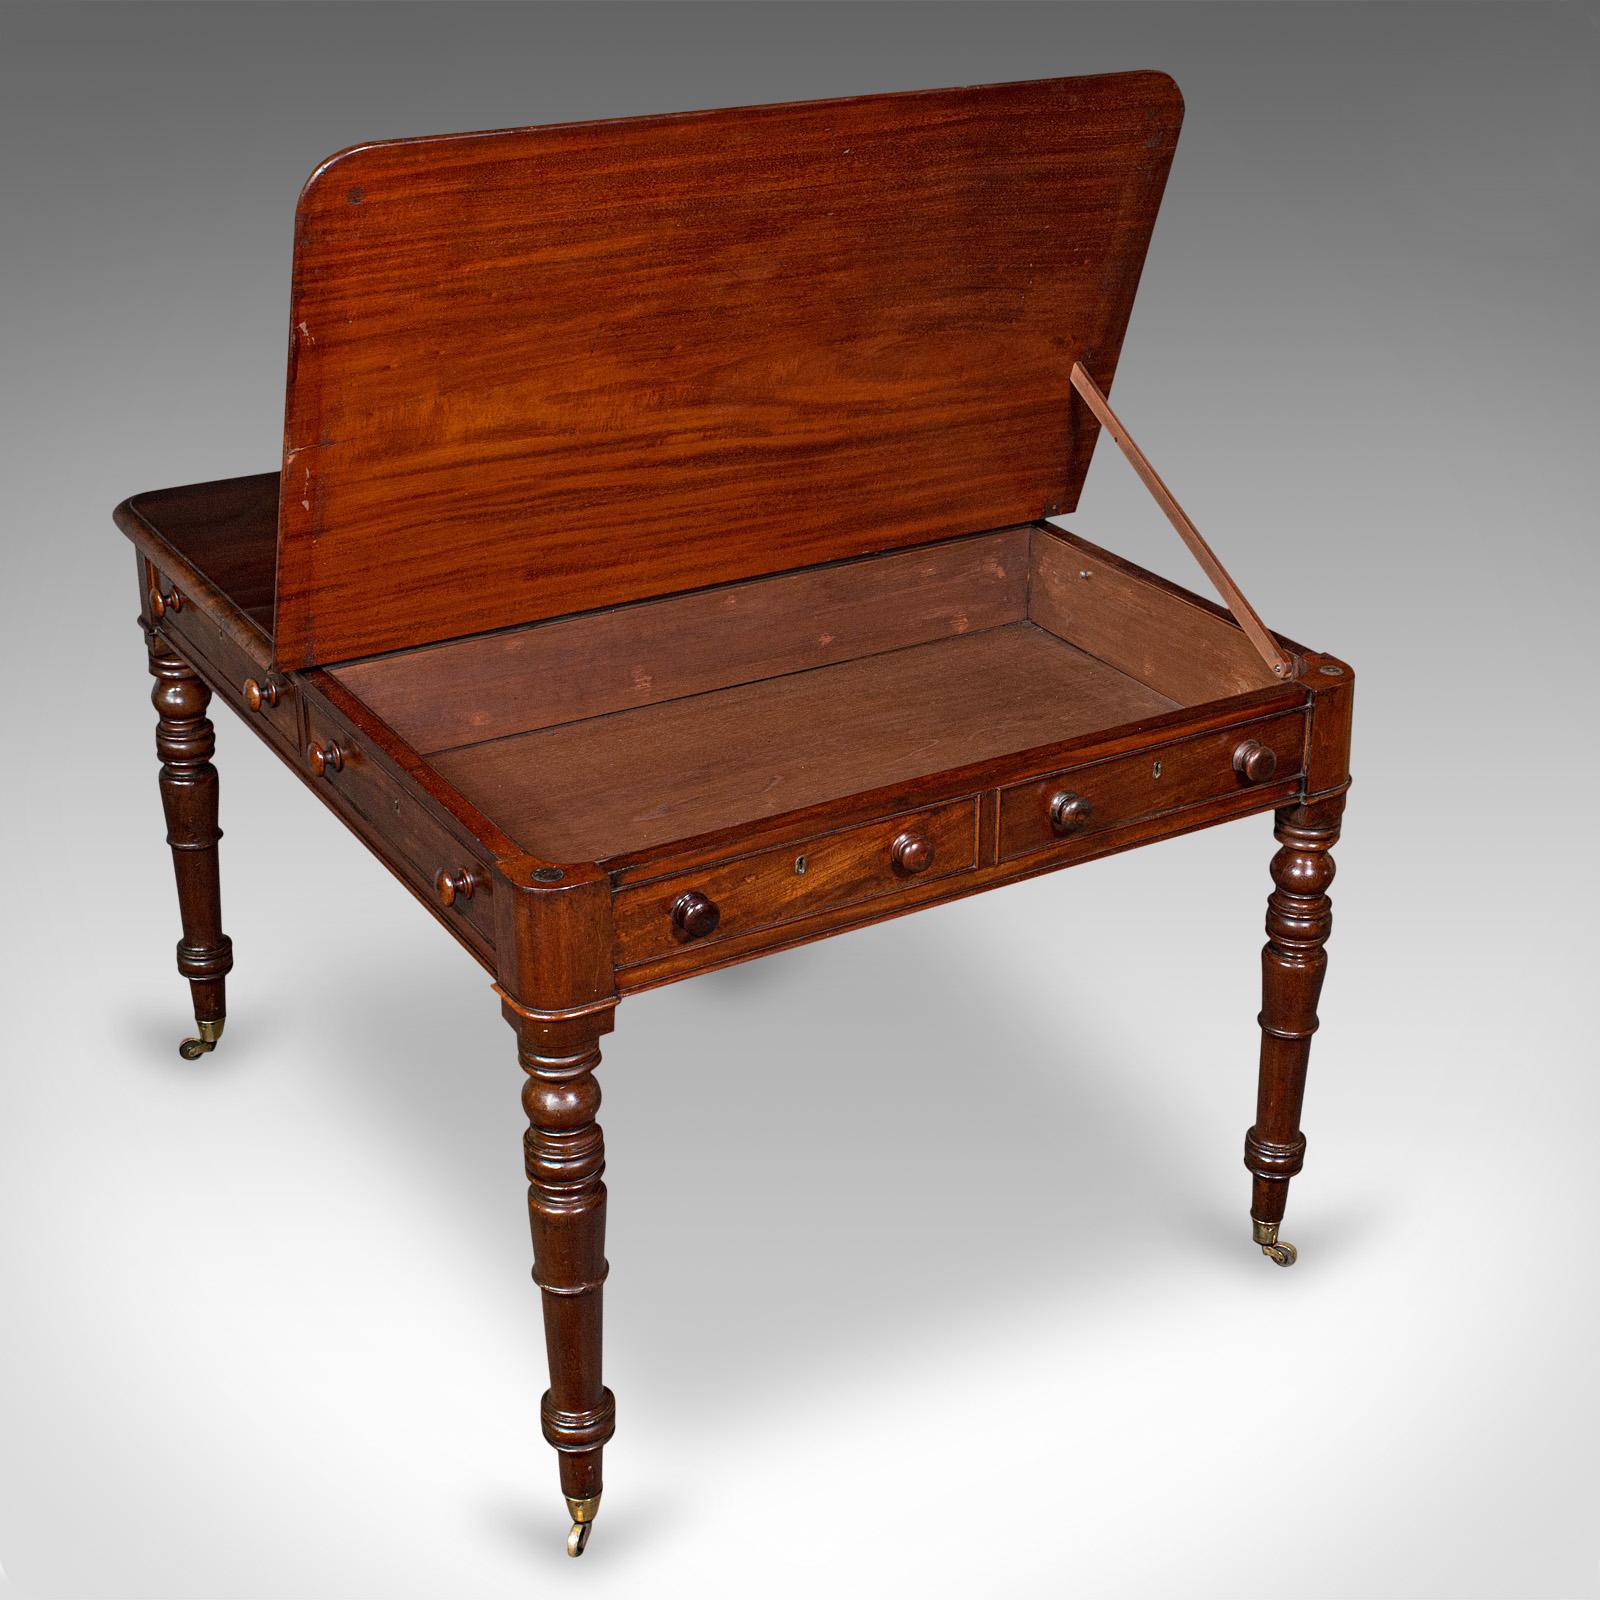 This is an antique cartographer's folio table. An English, mahogany lift over library table or desk, dating to the Georgian period, circa 1800.

Rare and unusual, this fascinating table presents a fine appearance and versatility
Displays a